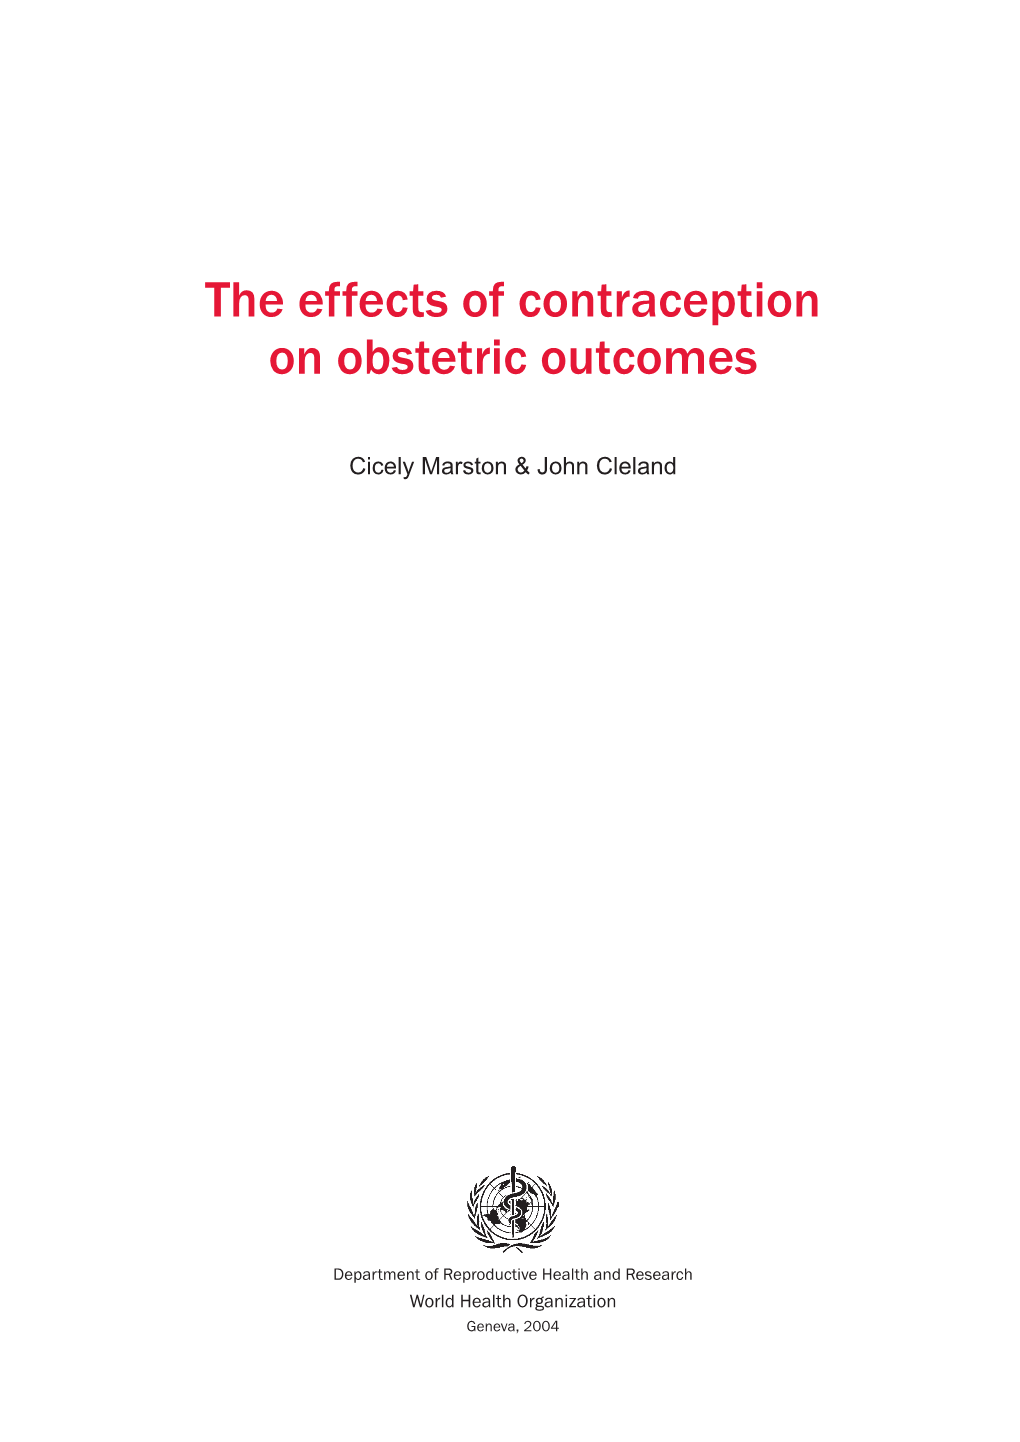 The Effects of Contraception on Obstetric Outcomes